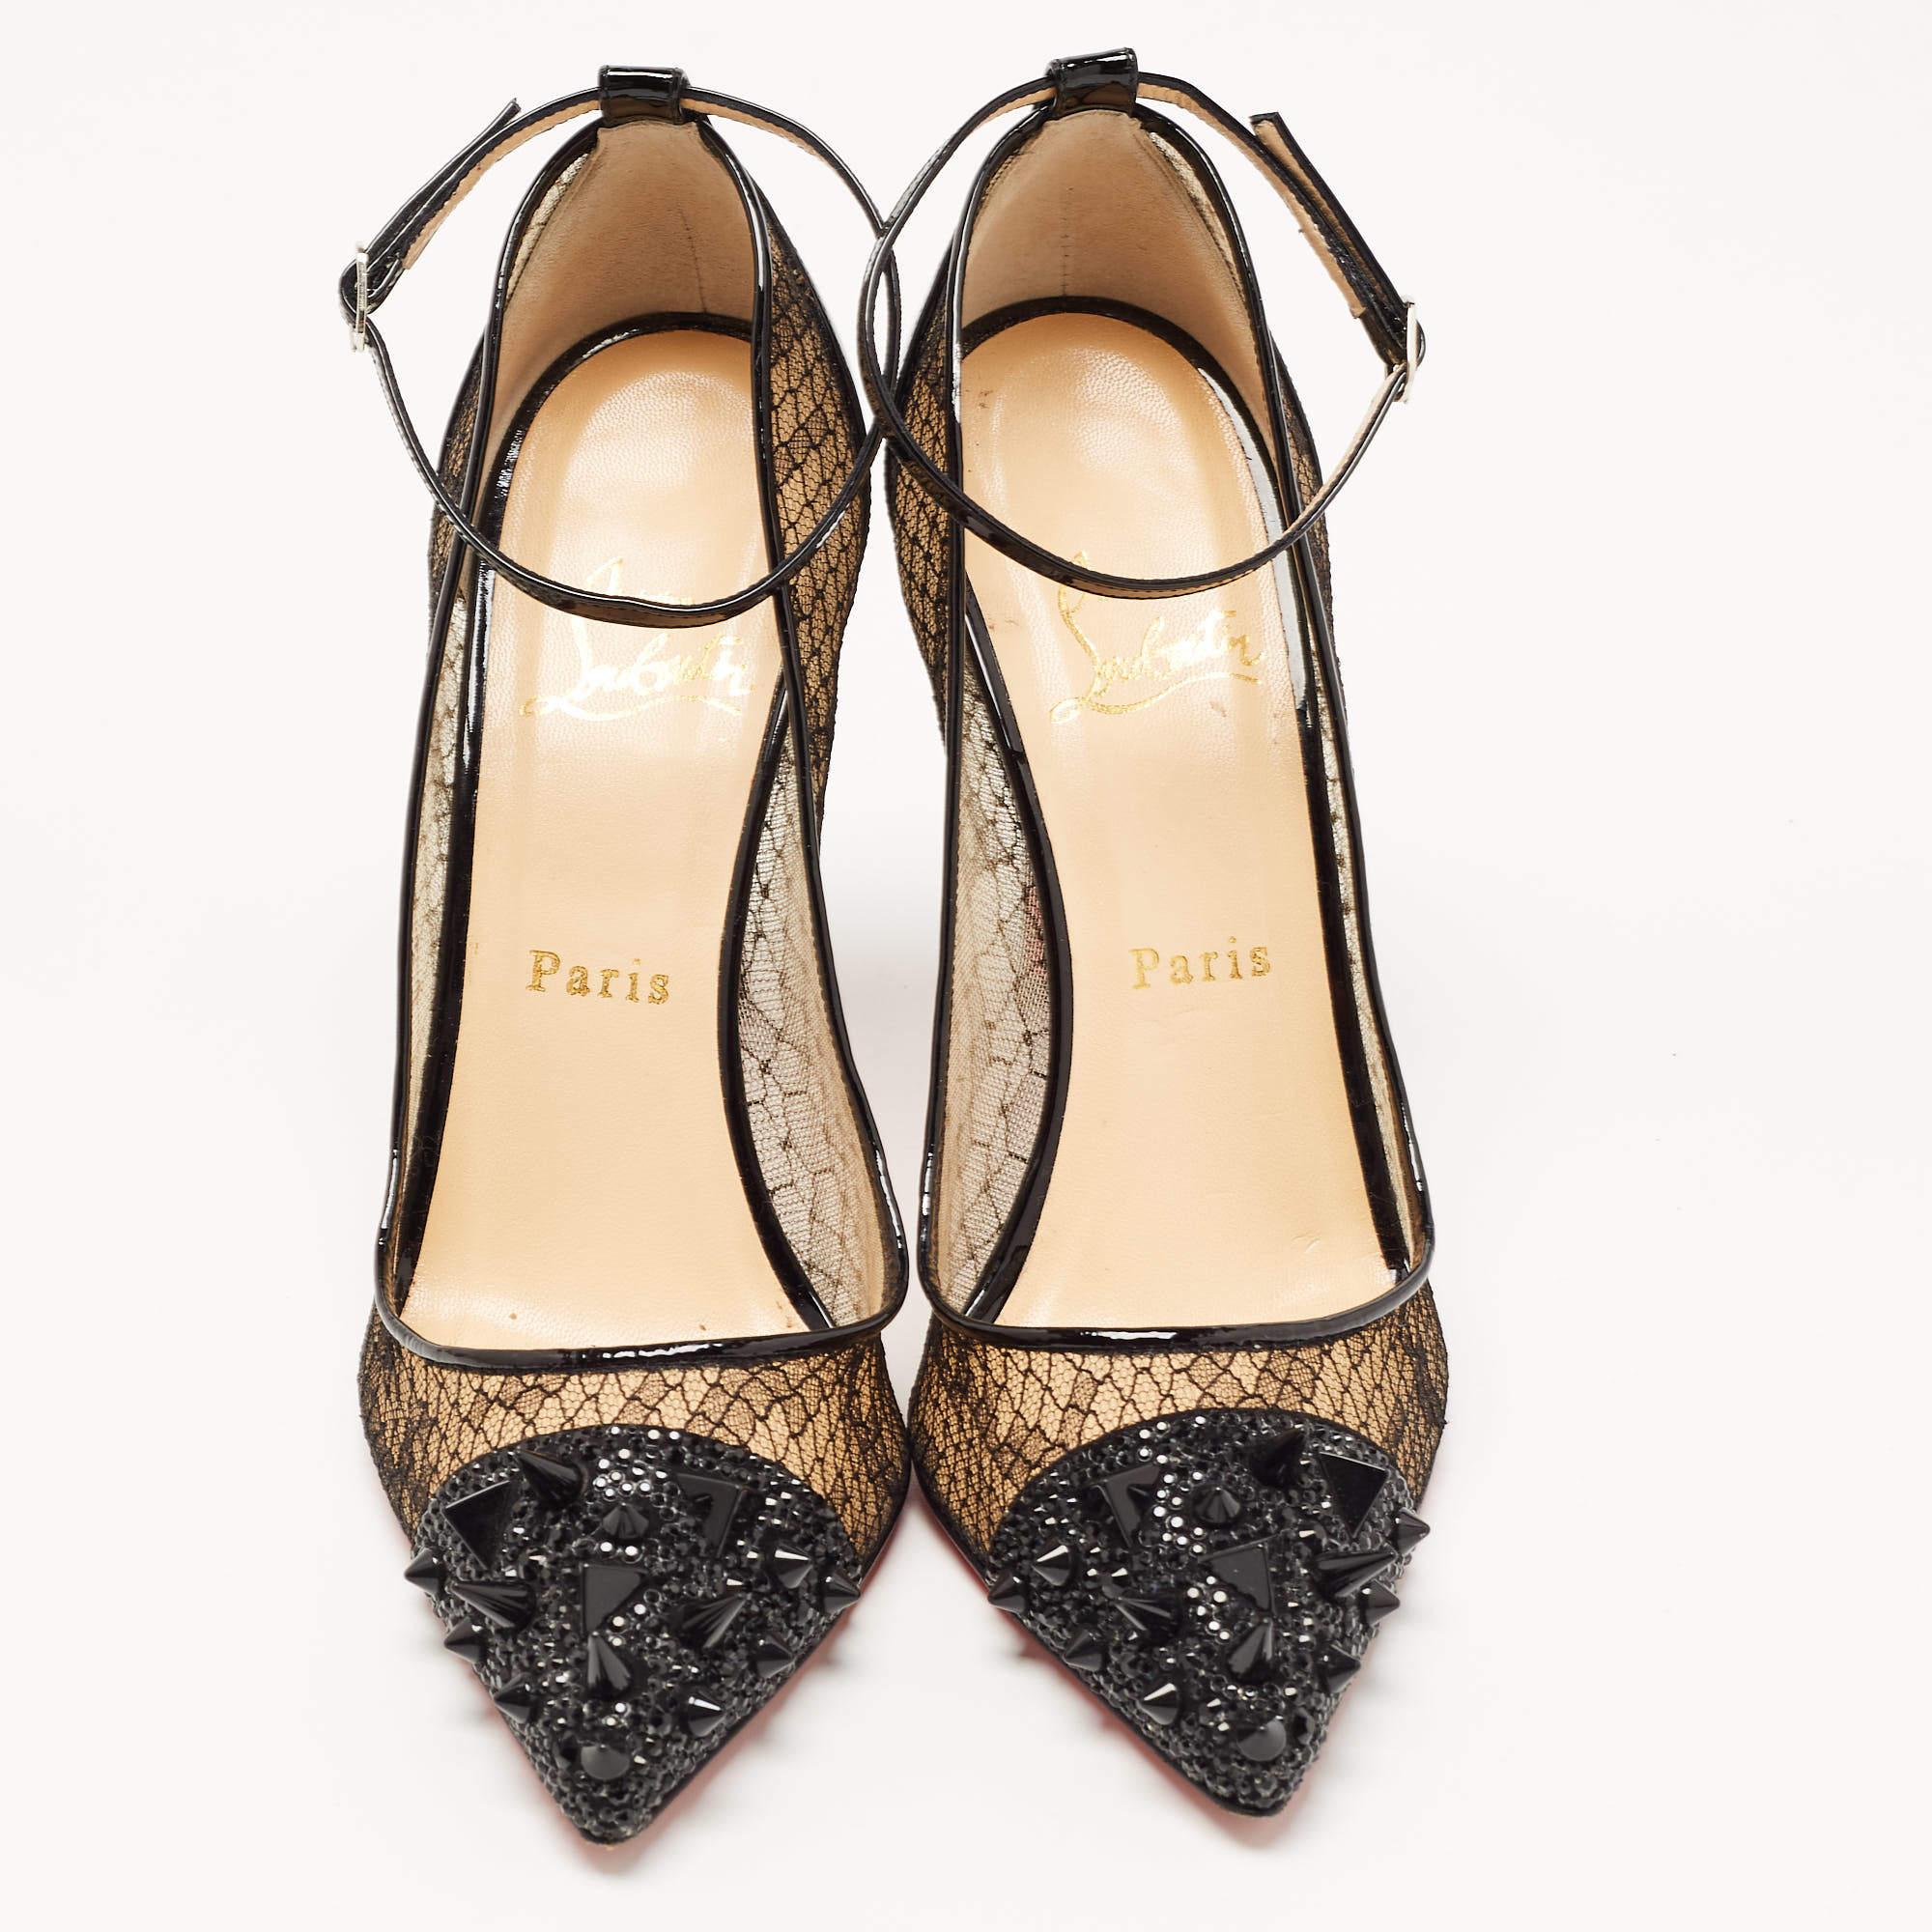 Make a statement with these Christian Louboutin black pumps for women. Impeccably crafted, these chic heels offer both fashion and comfort, elevating your look with each graceful step.

